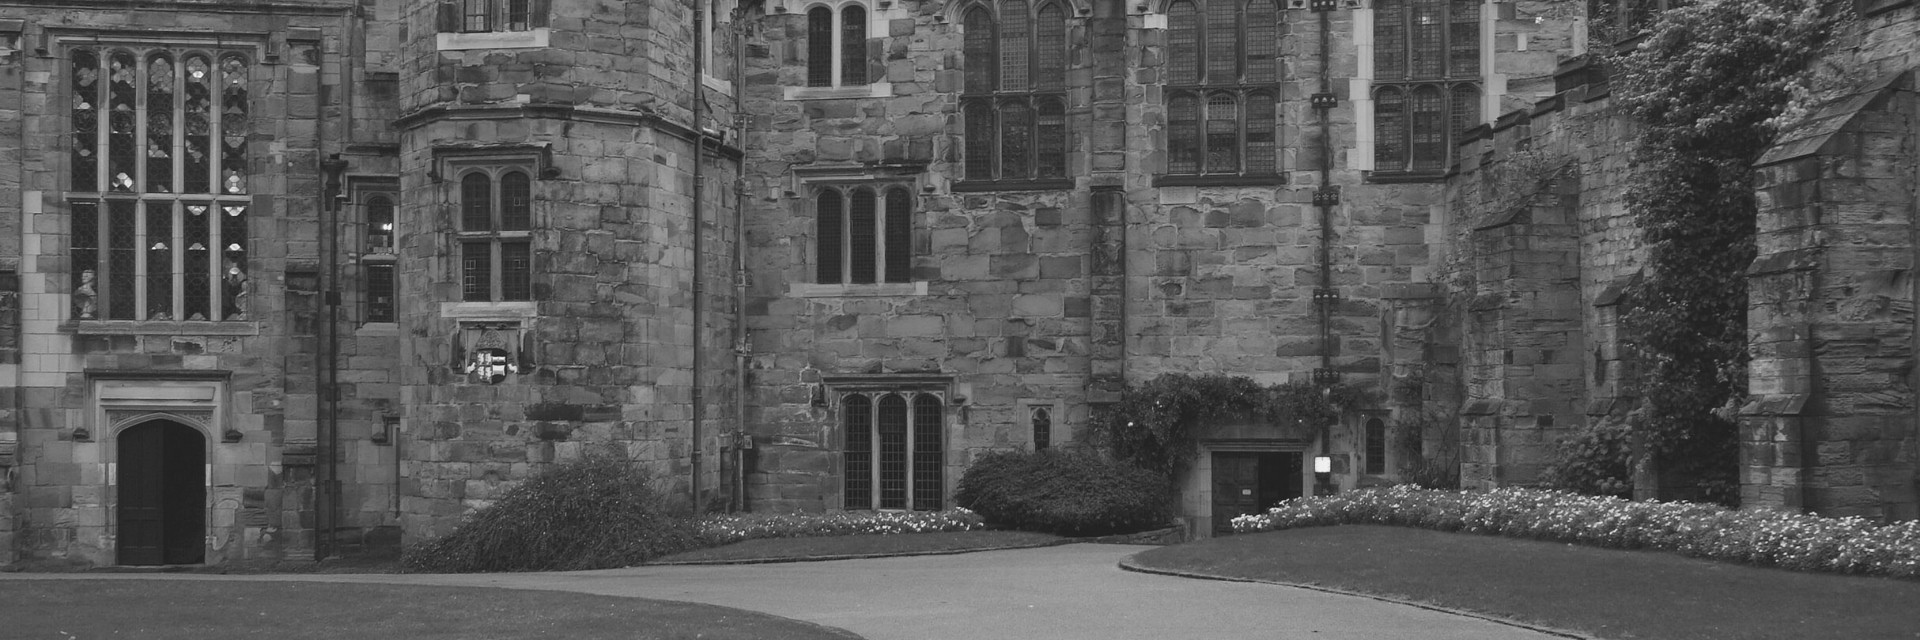 Durham Castle in black and white